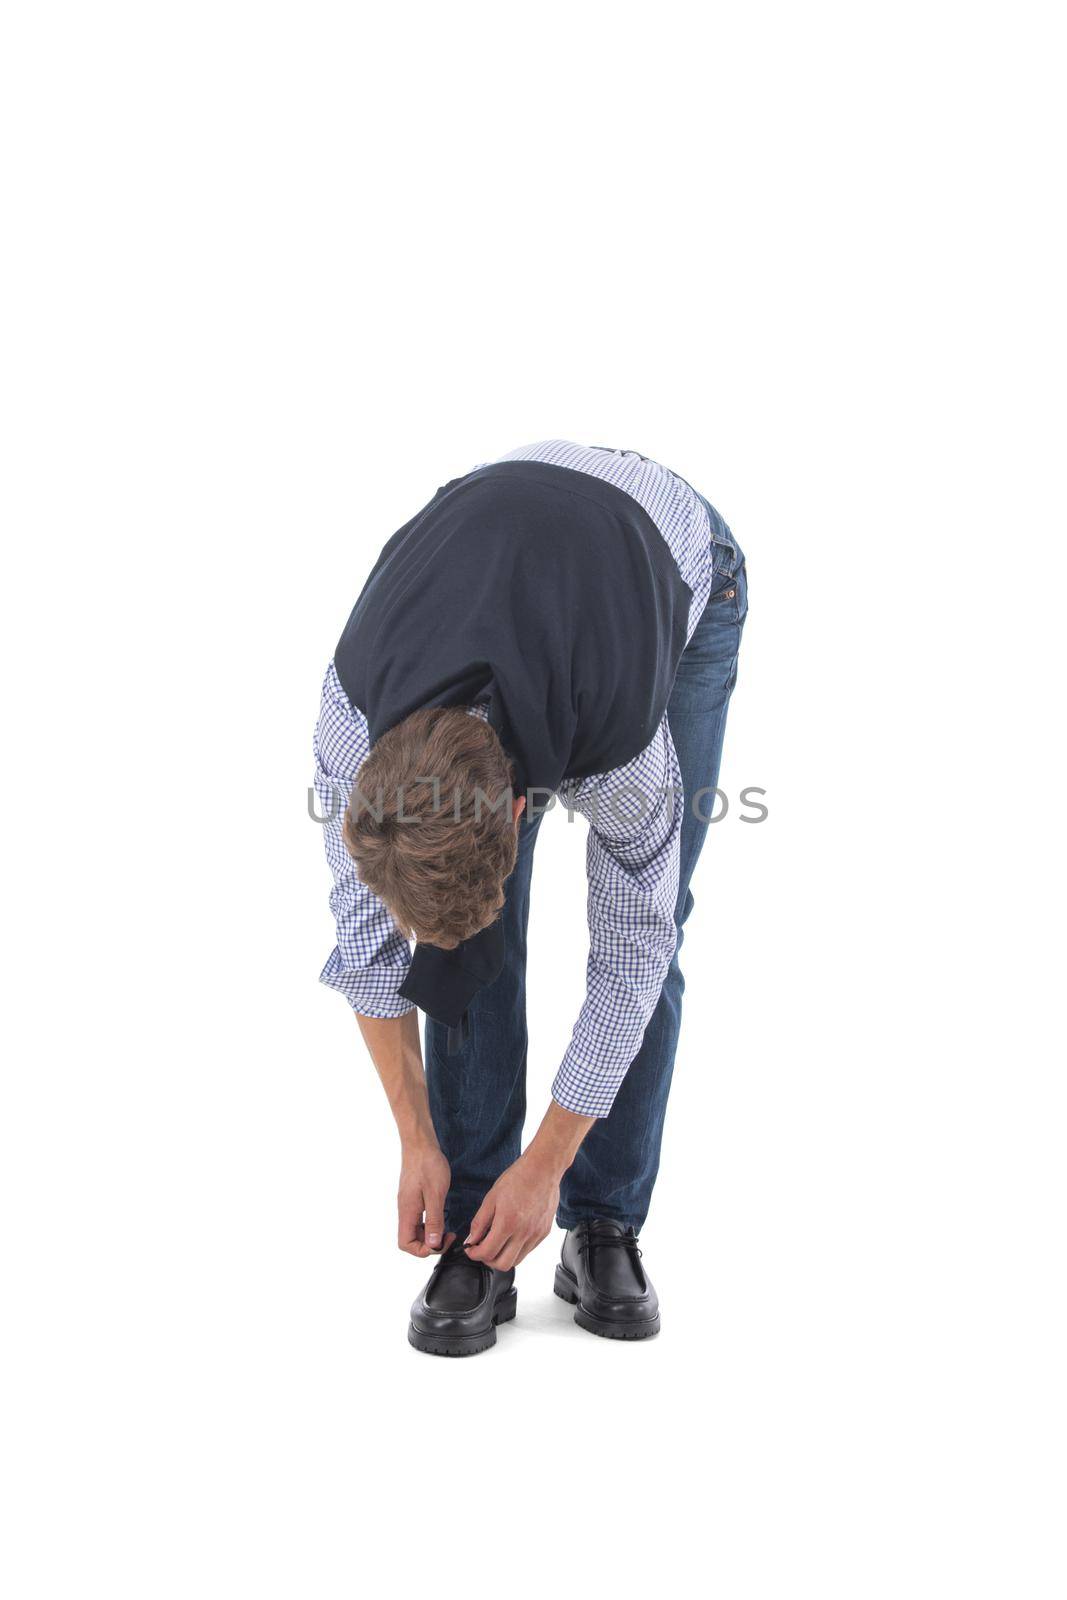 Man dressing up ties shoelaces, tying the laces, studio isolated on white background full length